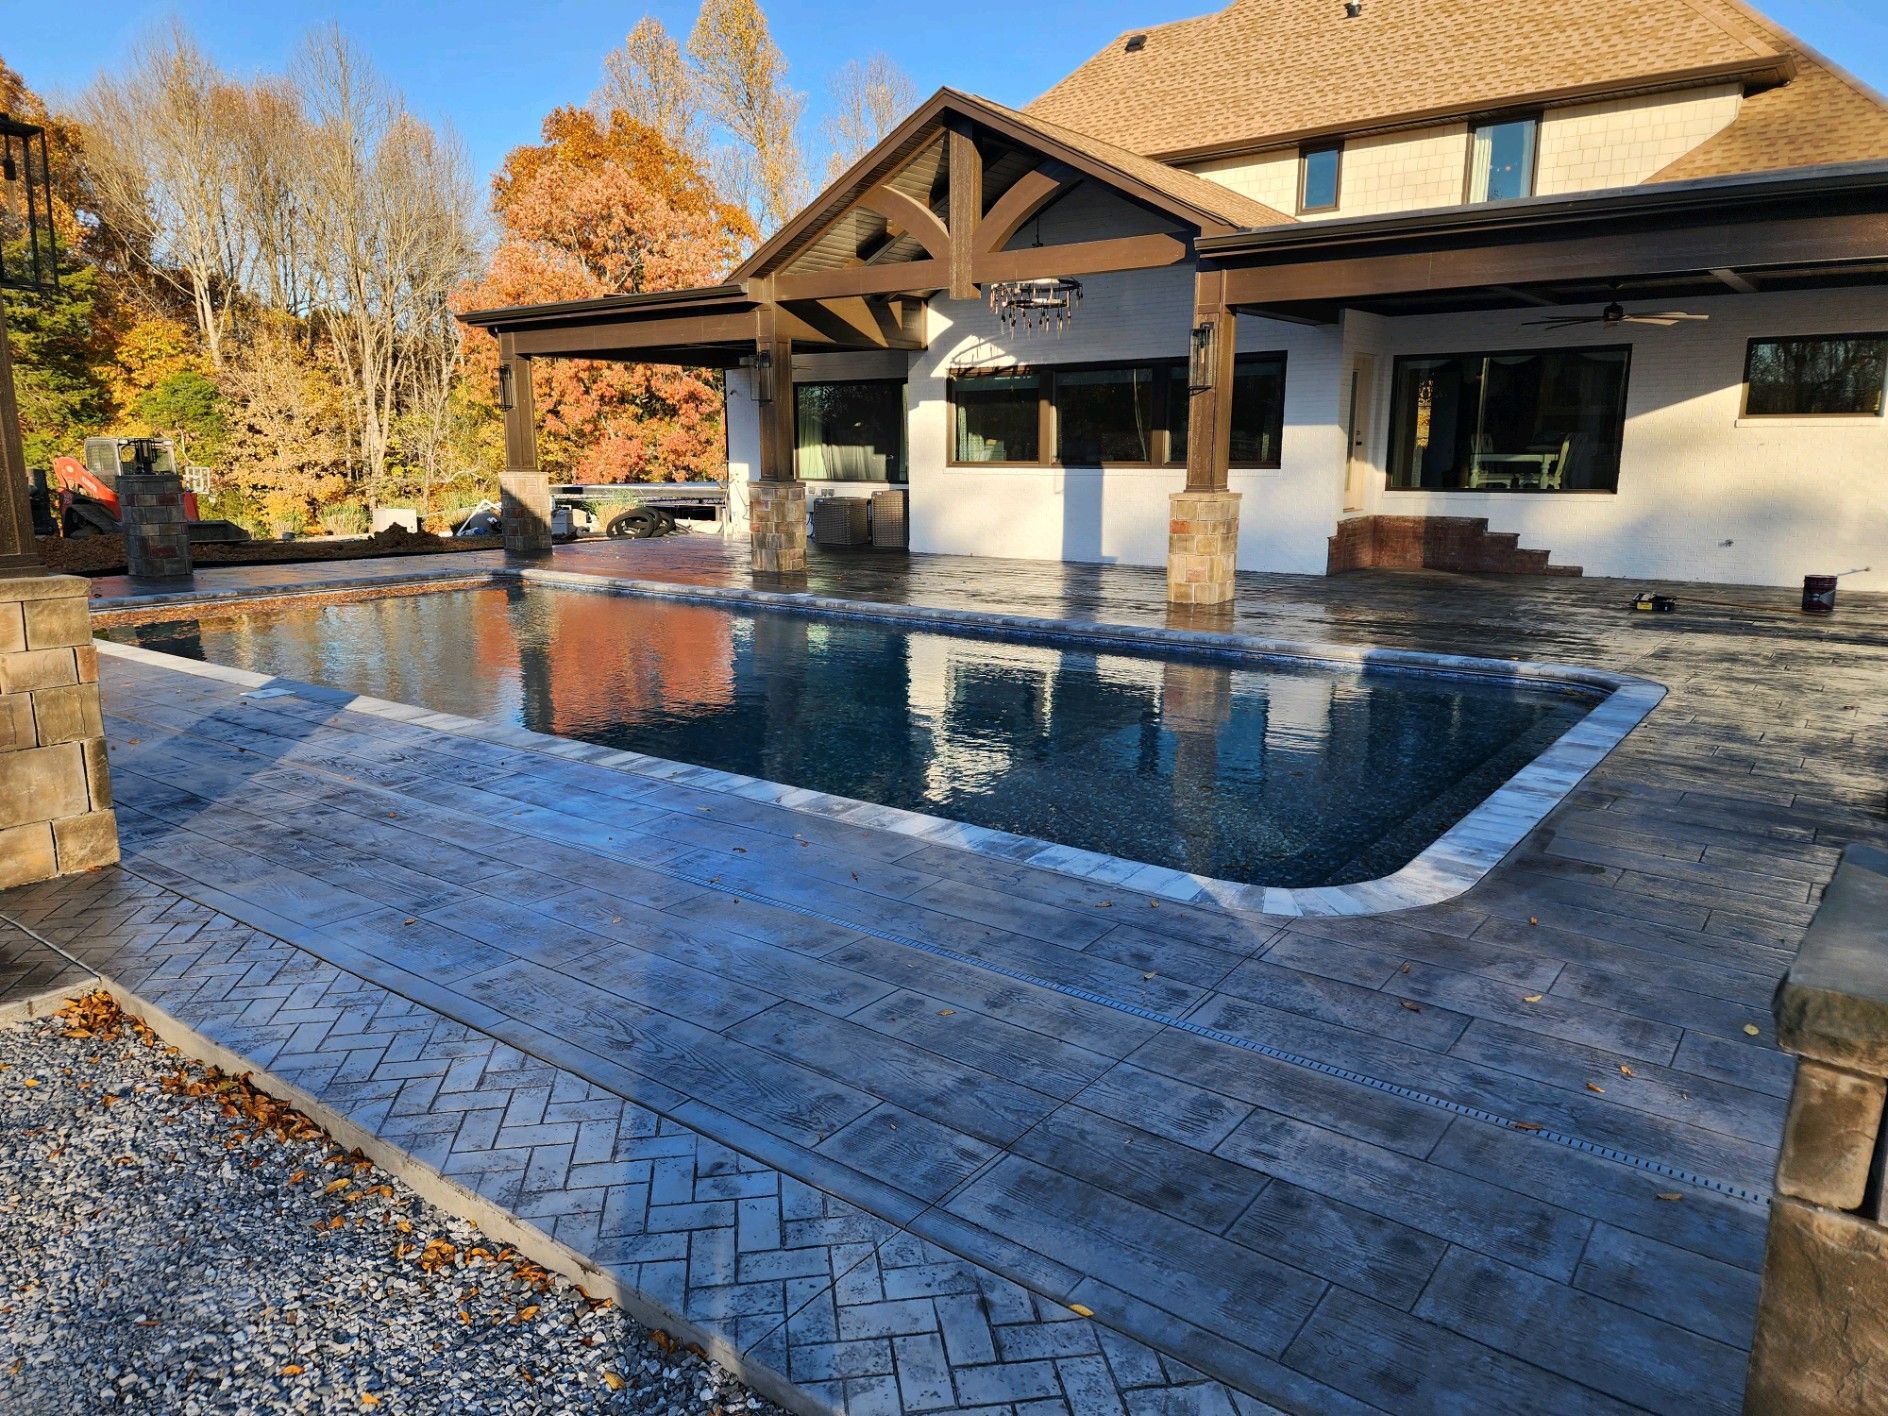 Large Swimming Pool in The Backyard of A House — Chapel Hill, TN — The Concrete Gentlemen